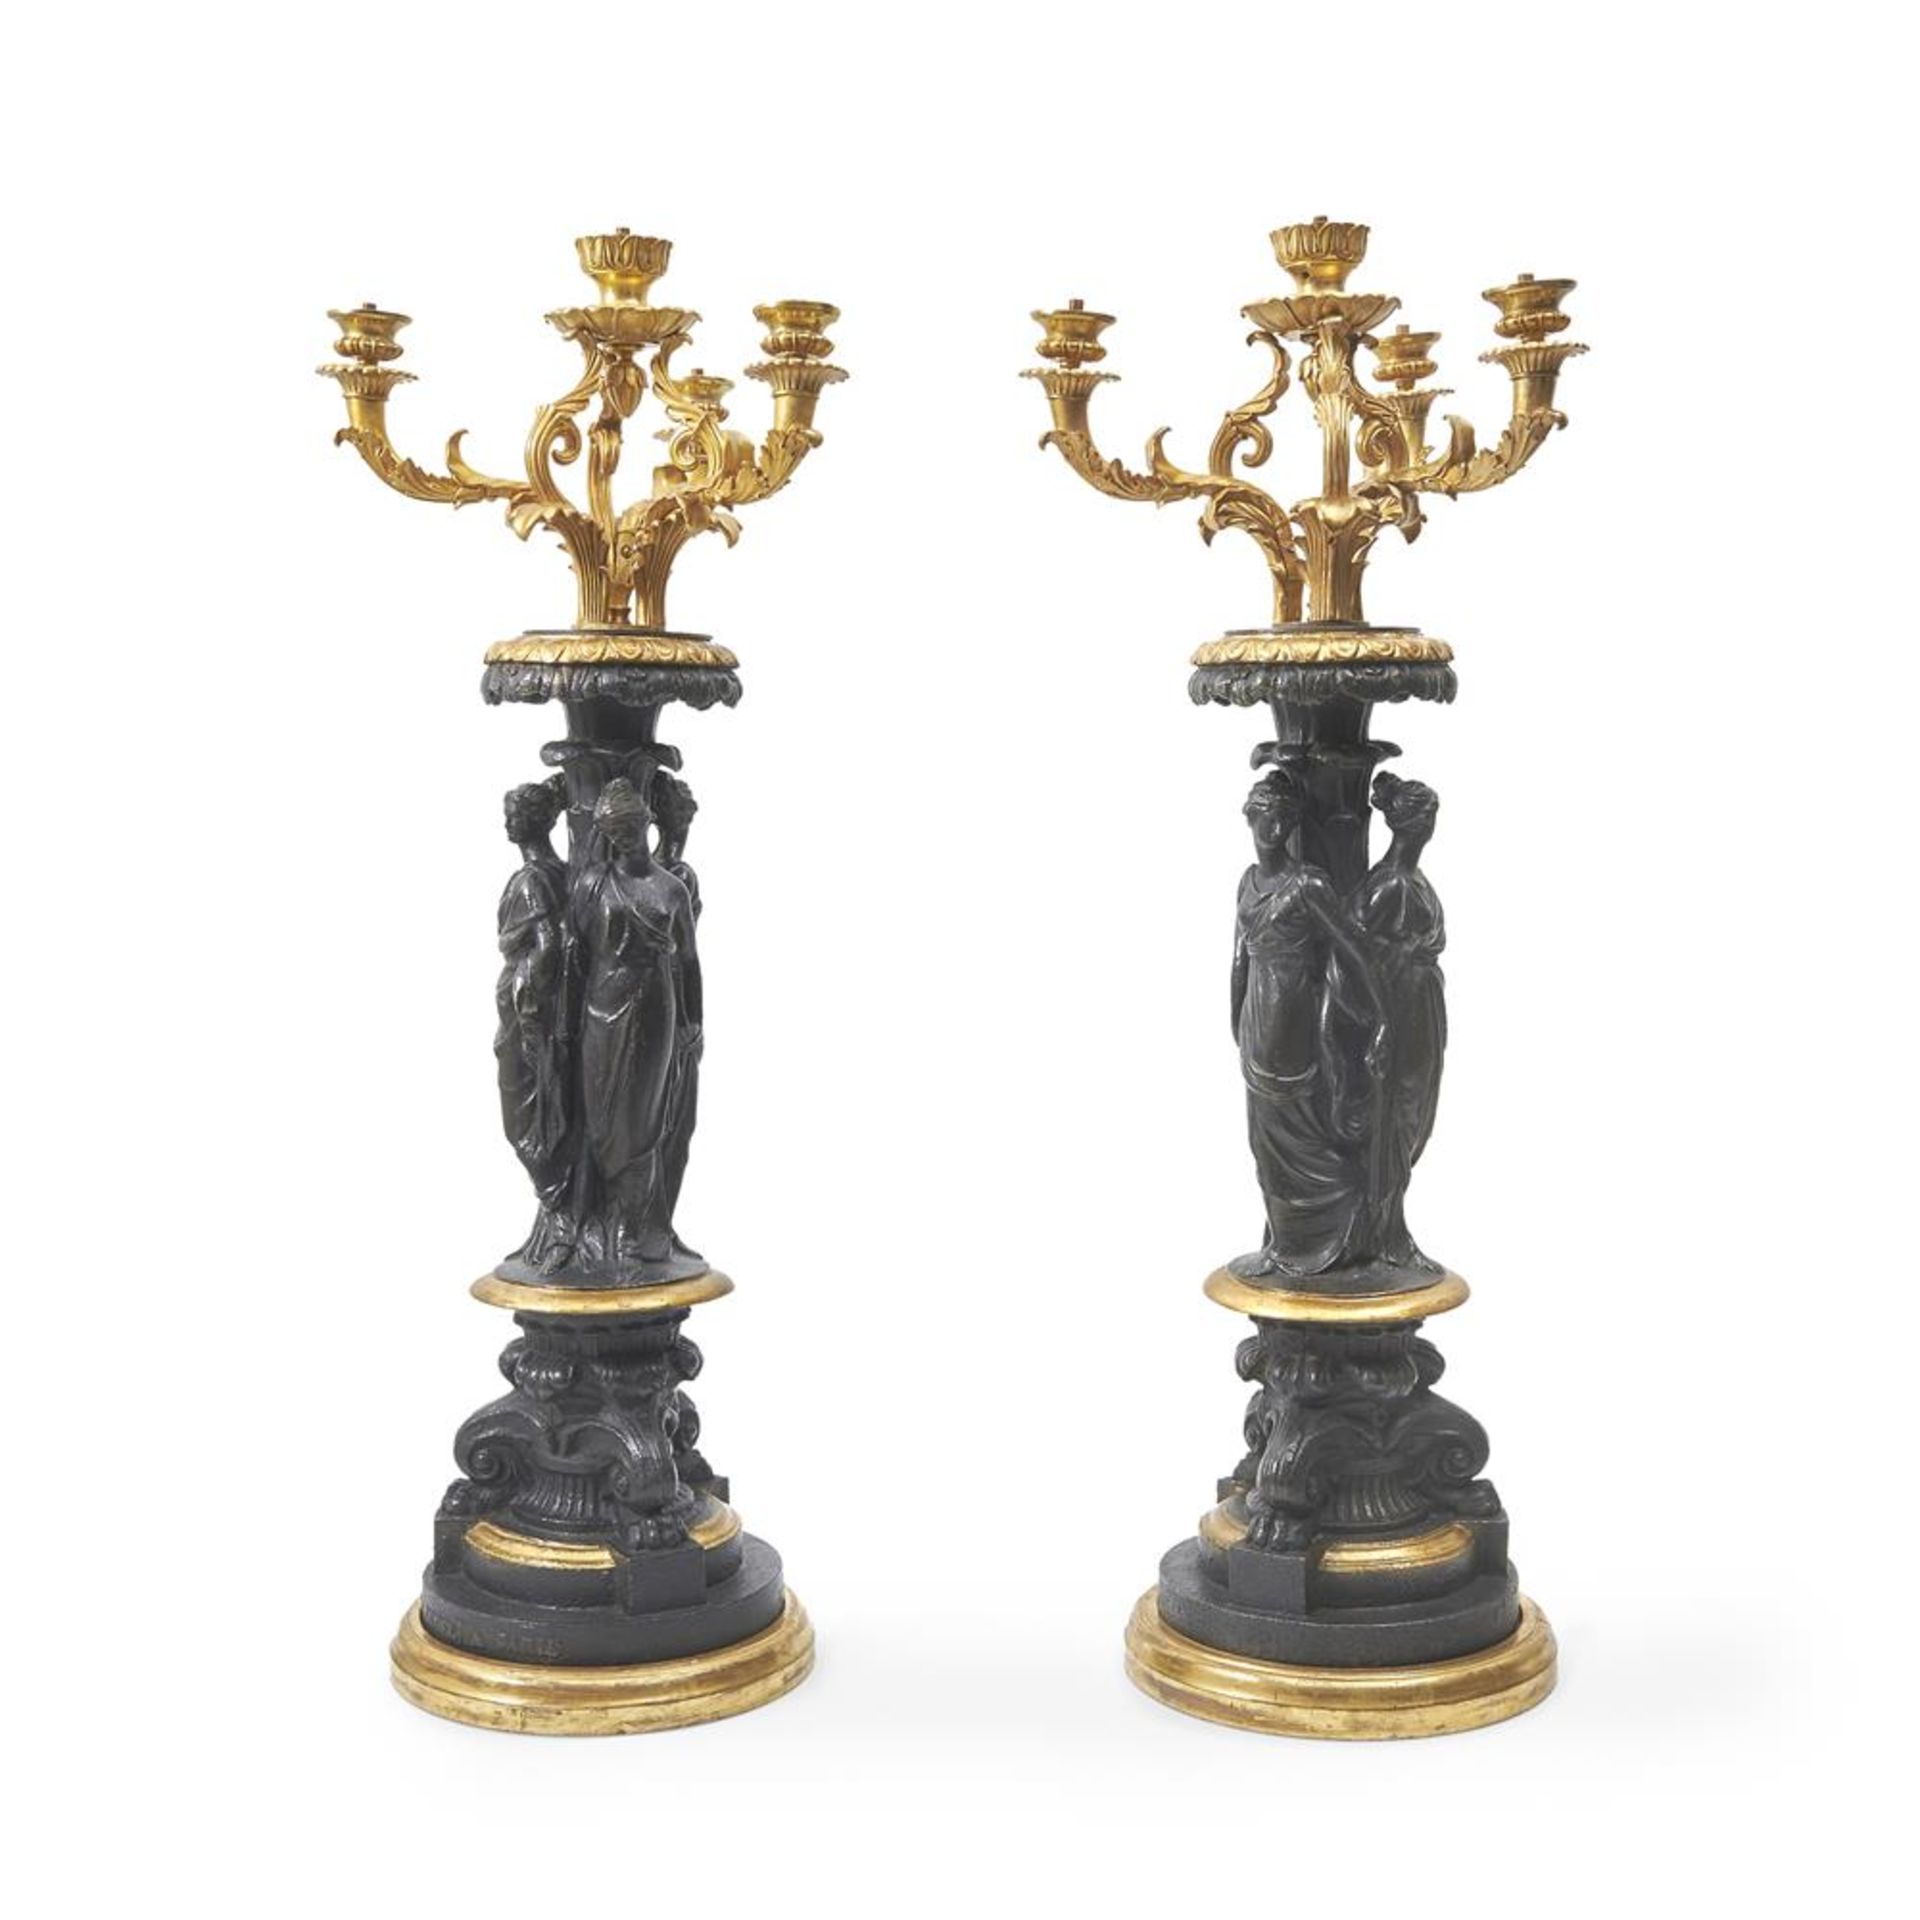 A PAIR OF FRENCH CAST IRON AND ORMOLU FIGURAL CANDELABRA J.J. DUCEL, PARIS, CIRCA 1860 AND LATER